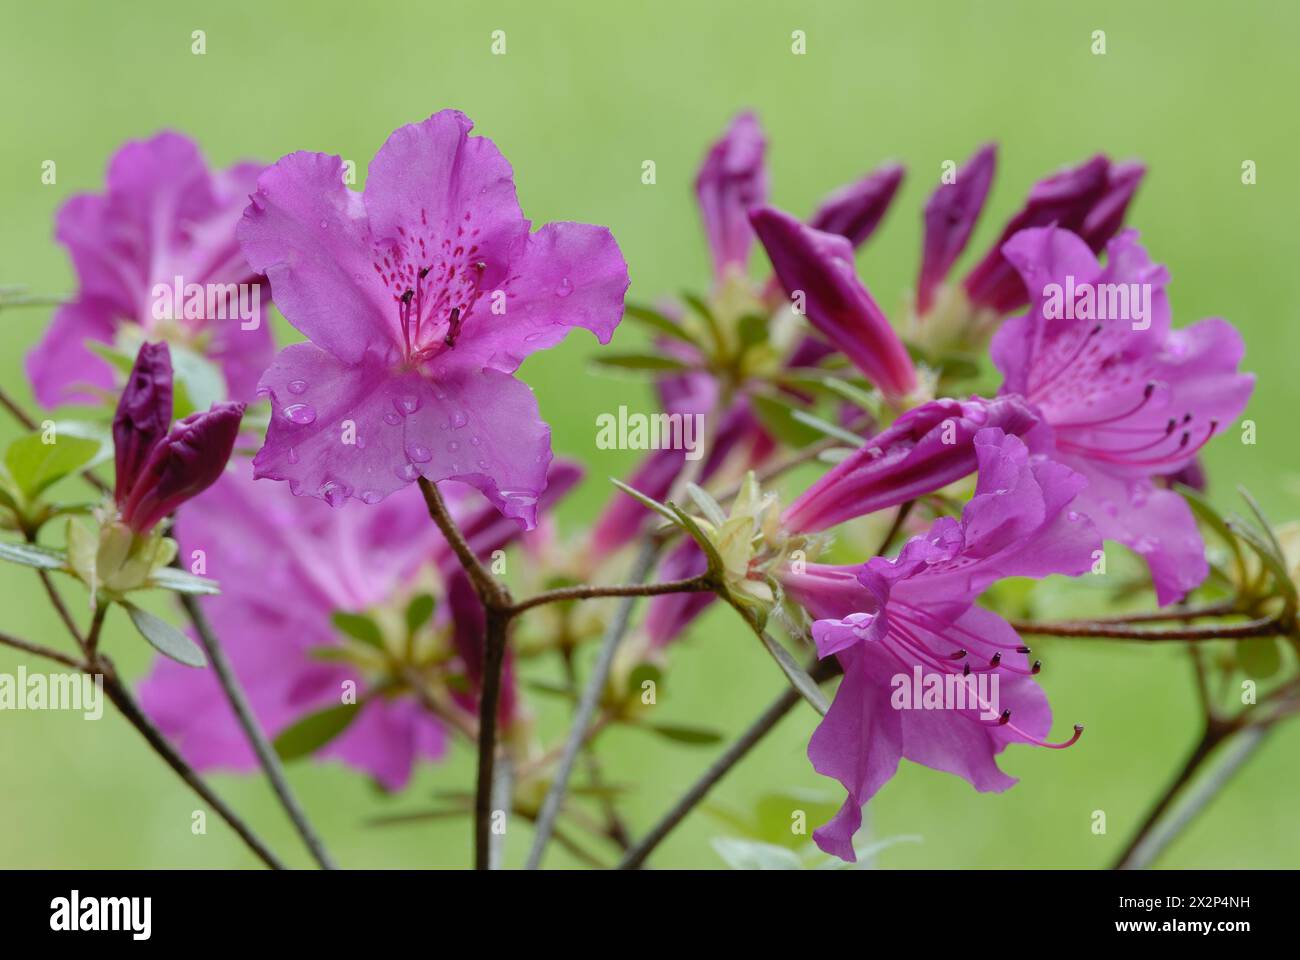 Azalea japonica, Amoena, Rhododendron obtusum violet flowers, closeup. Plant with full bloom. After rain. Isolated green background. Trencin, Slovakia Stock Photo